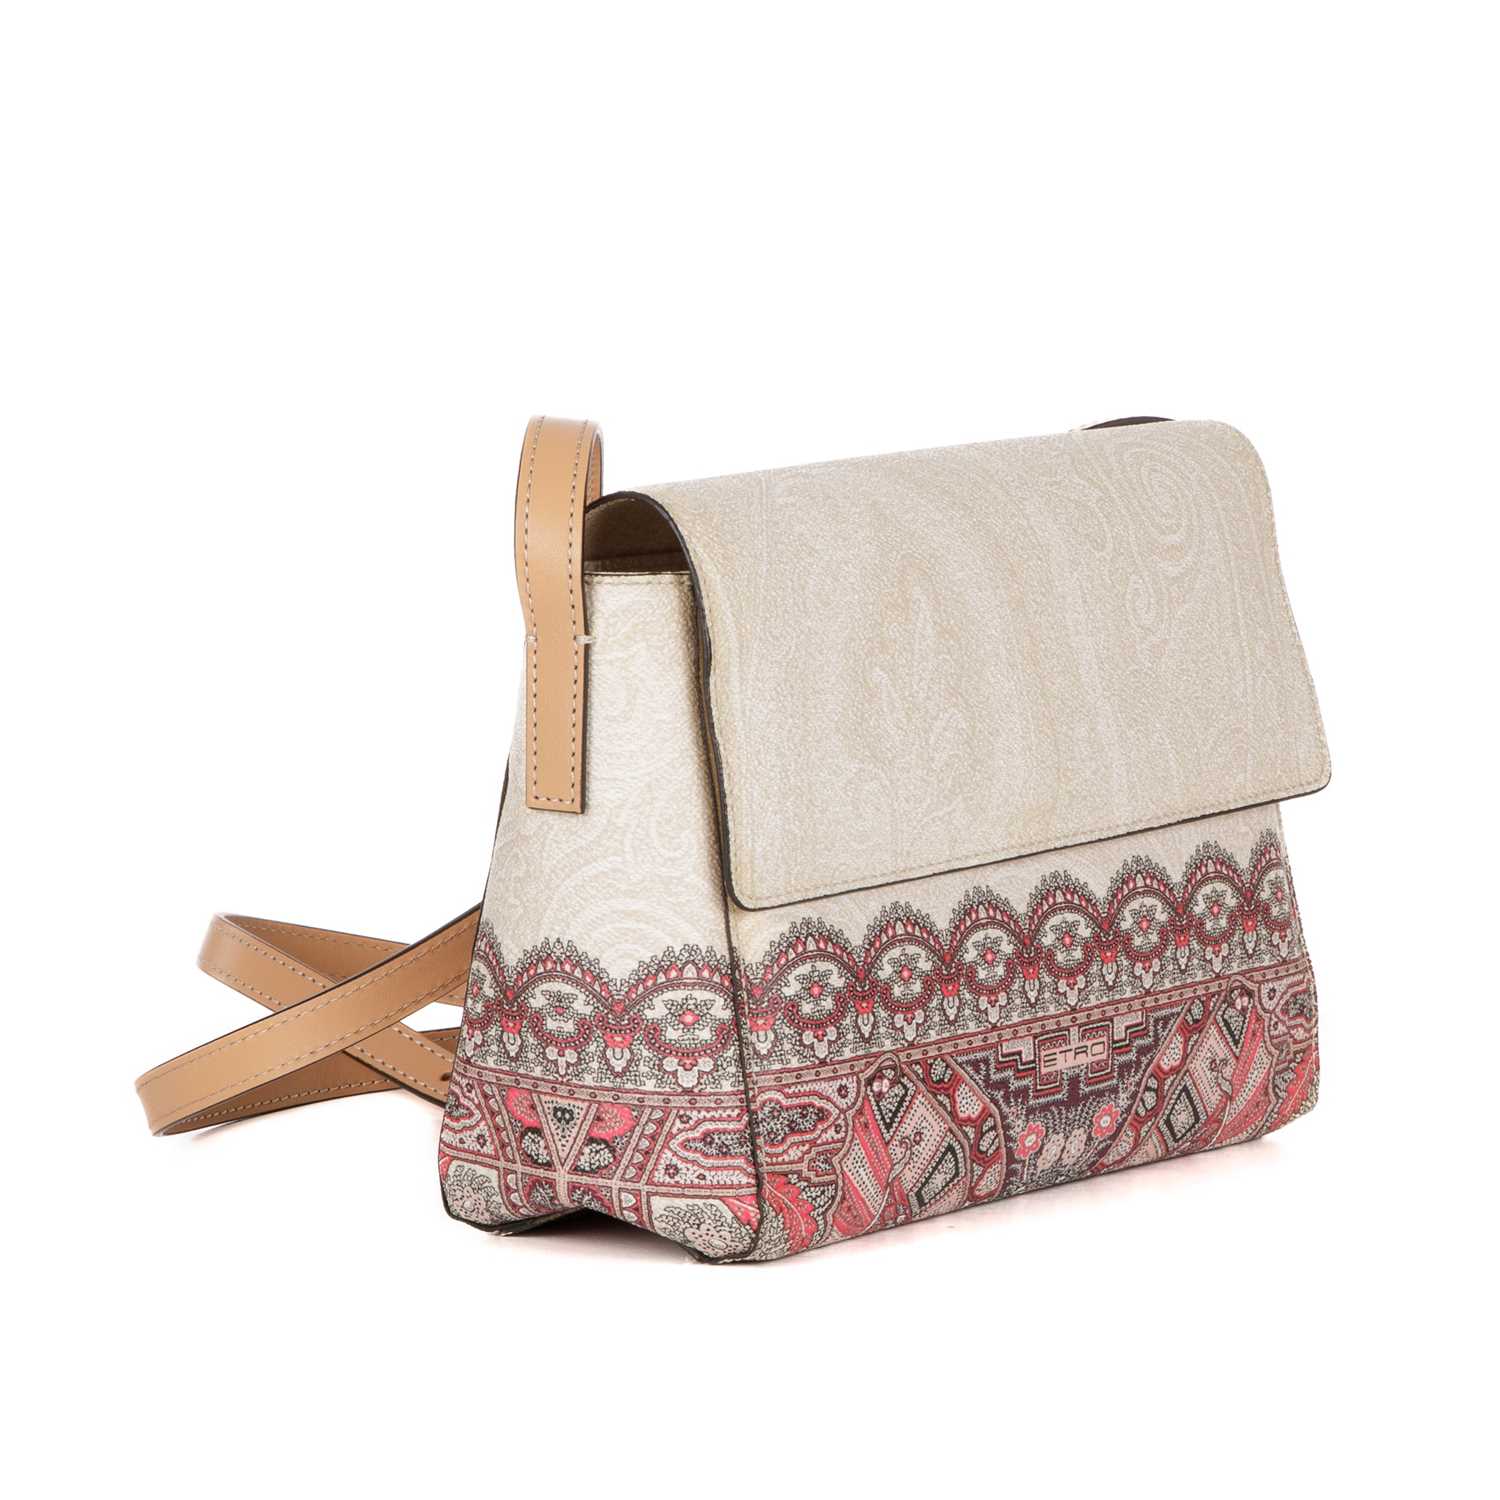 Etro, a coated canvas crossbody handbag, featuring a subtle paisley pattern to the cream exterior - Image 5 of 6